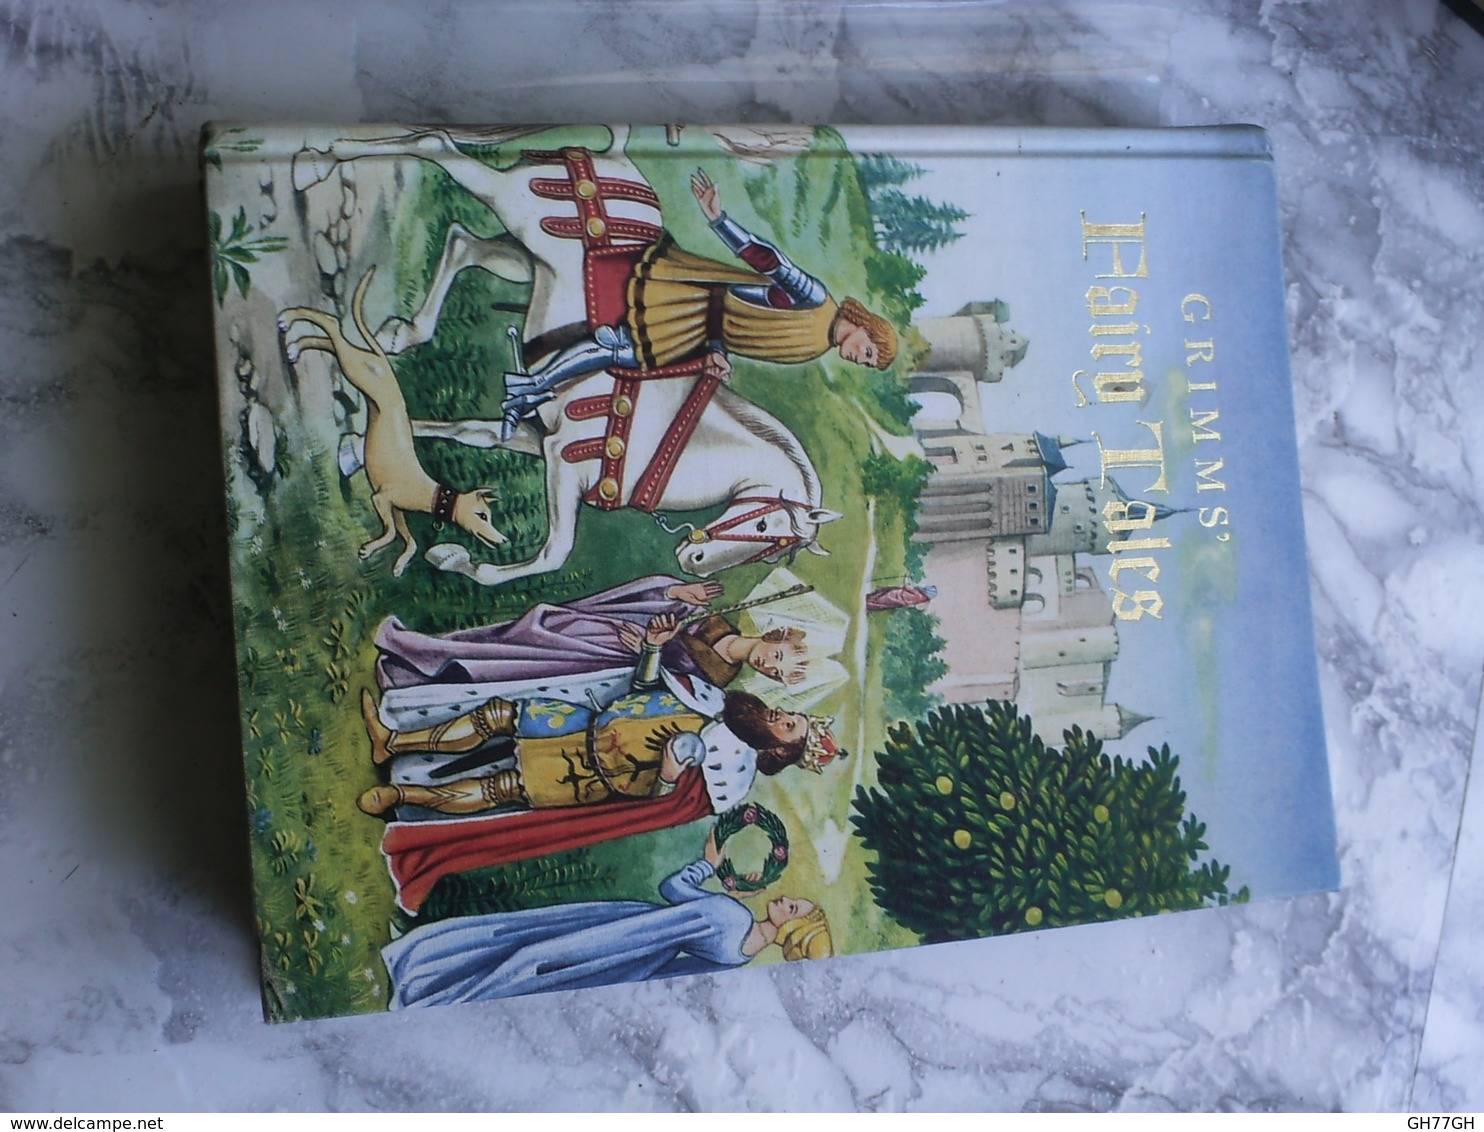 Grimm's Fairy Tales By The Brothers Grimm -Grosset & Dunlap Publishers NY 1974. CONTES DE GRIMM - Sprookjes & Fantasie